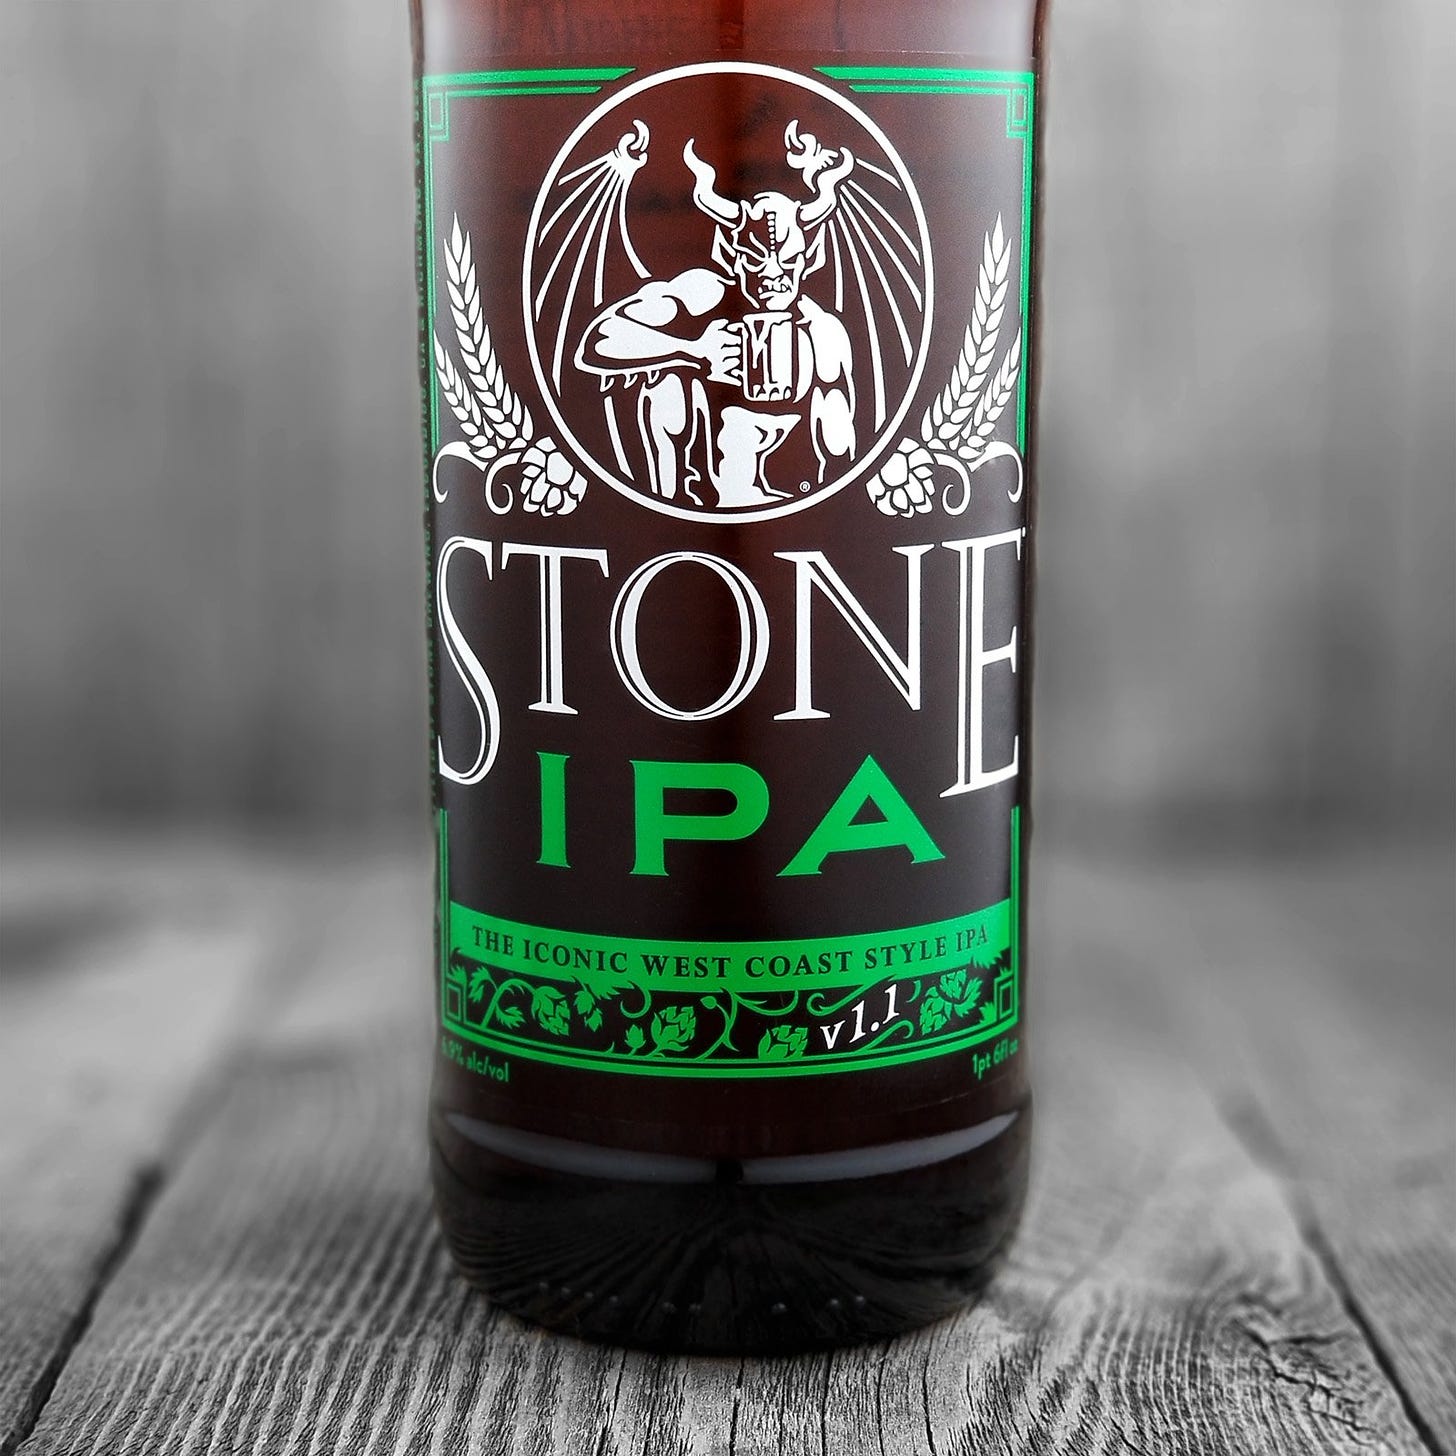 Stone IPA | Craft Beer Kings - The best place to buy craft beer online